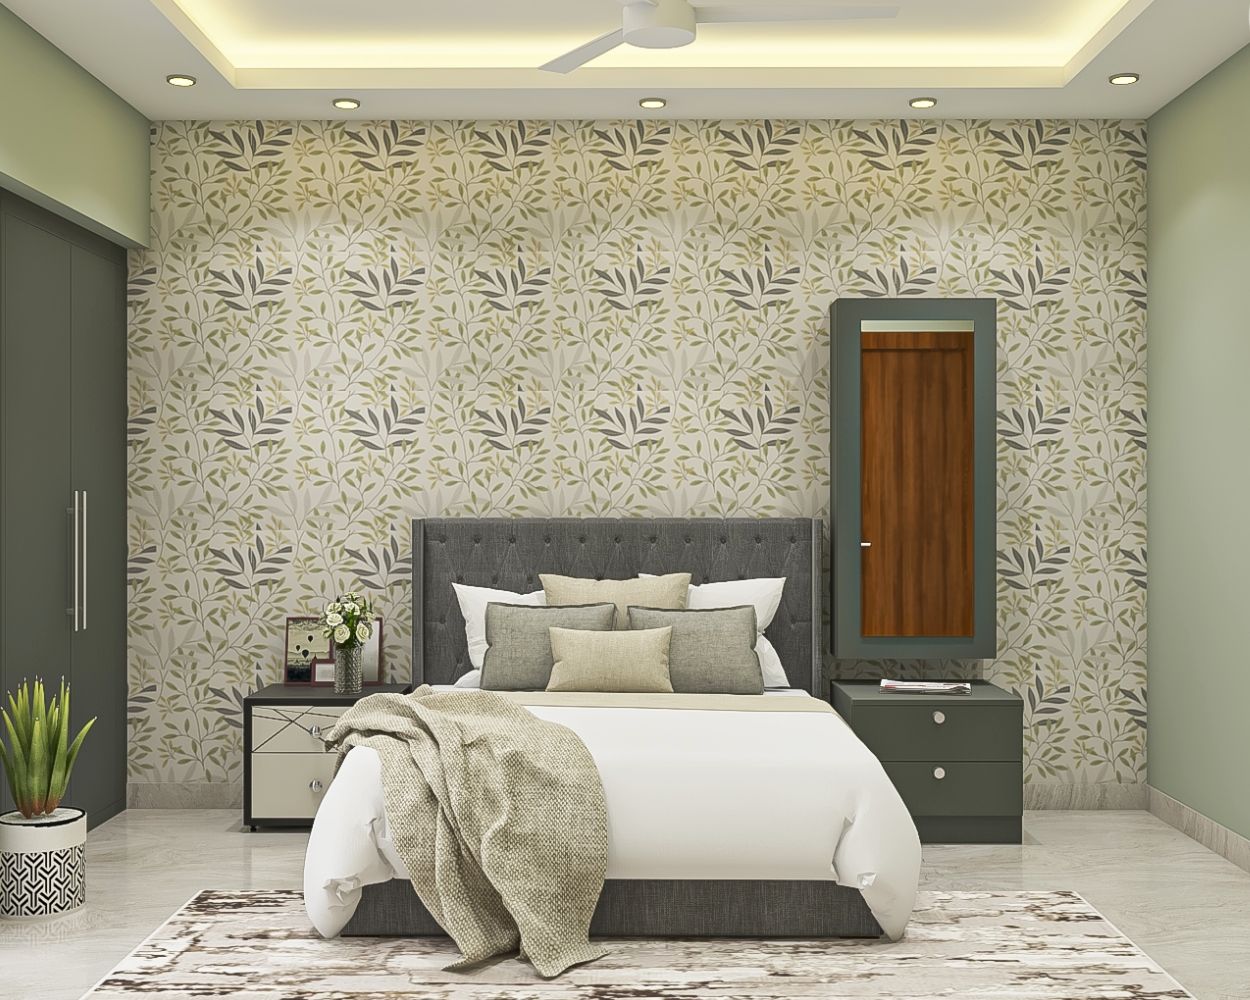 Contemporary Guest Room Design With Beige Tropical-Themed Wallpaper